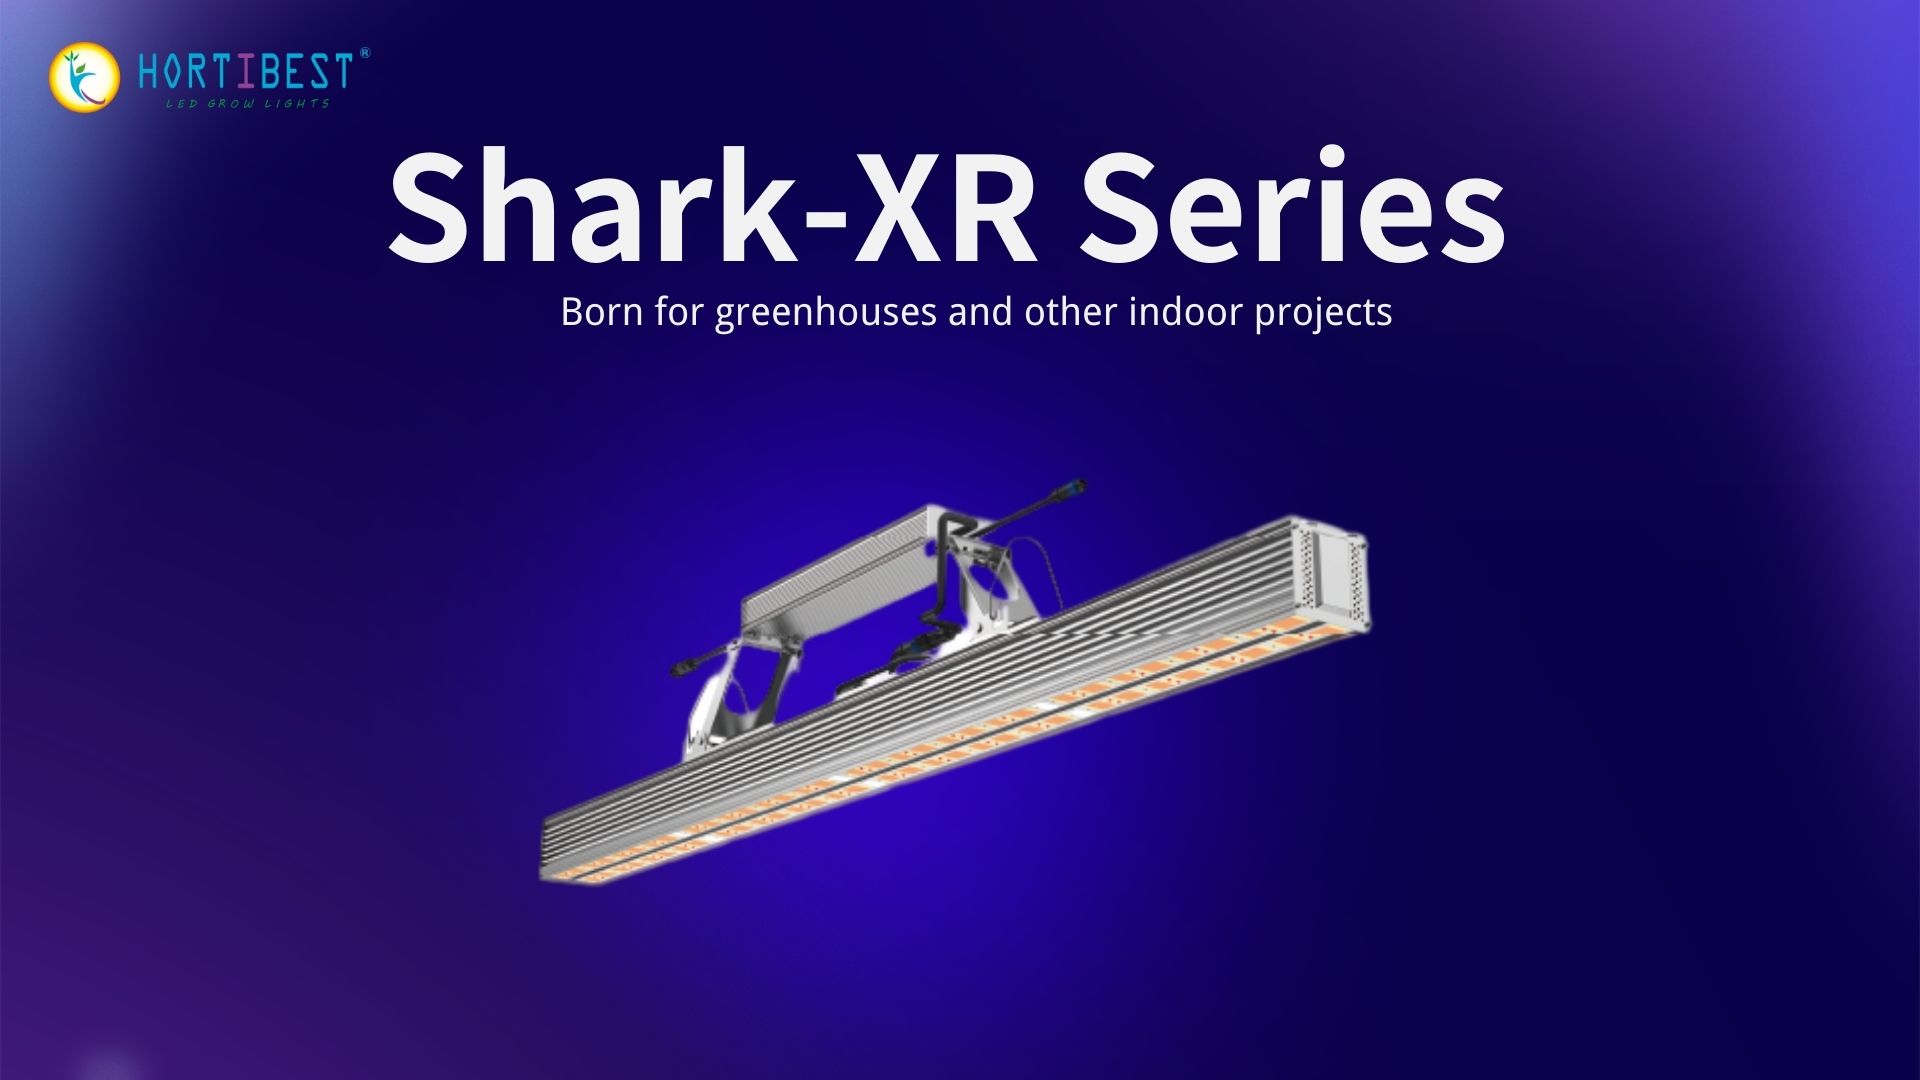 Shark-XR Series for Greenhouses or Other Indoor Projects